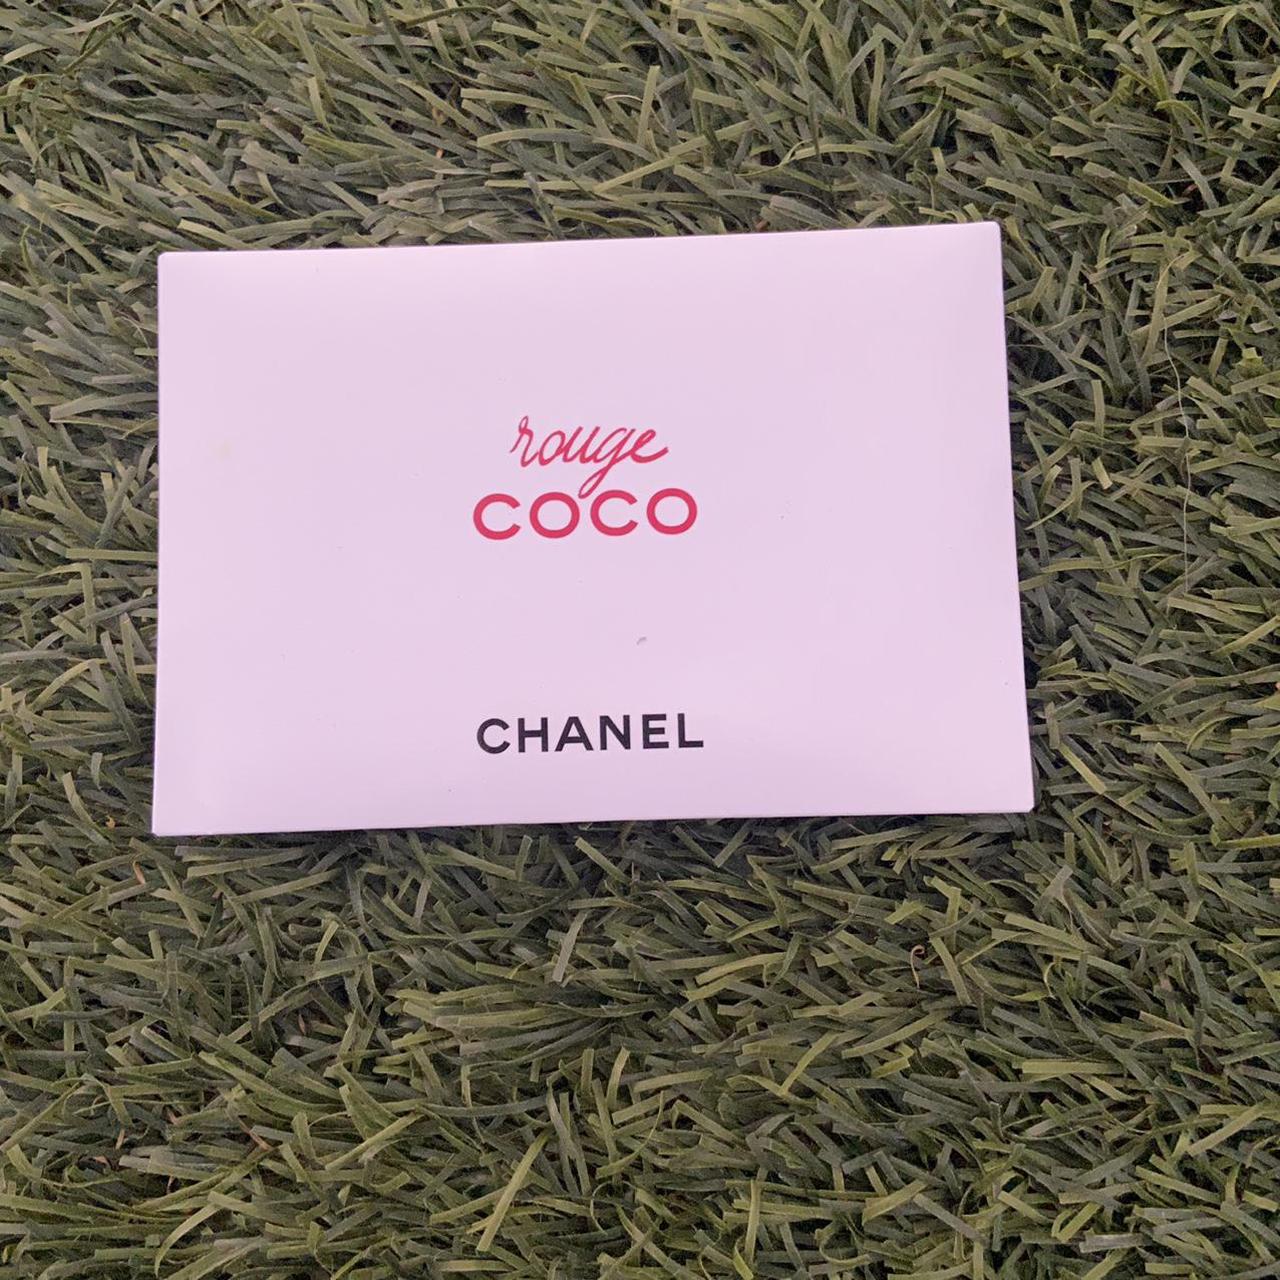 CHANEL, Makeup, Chanel Le Coton With Samples